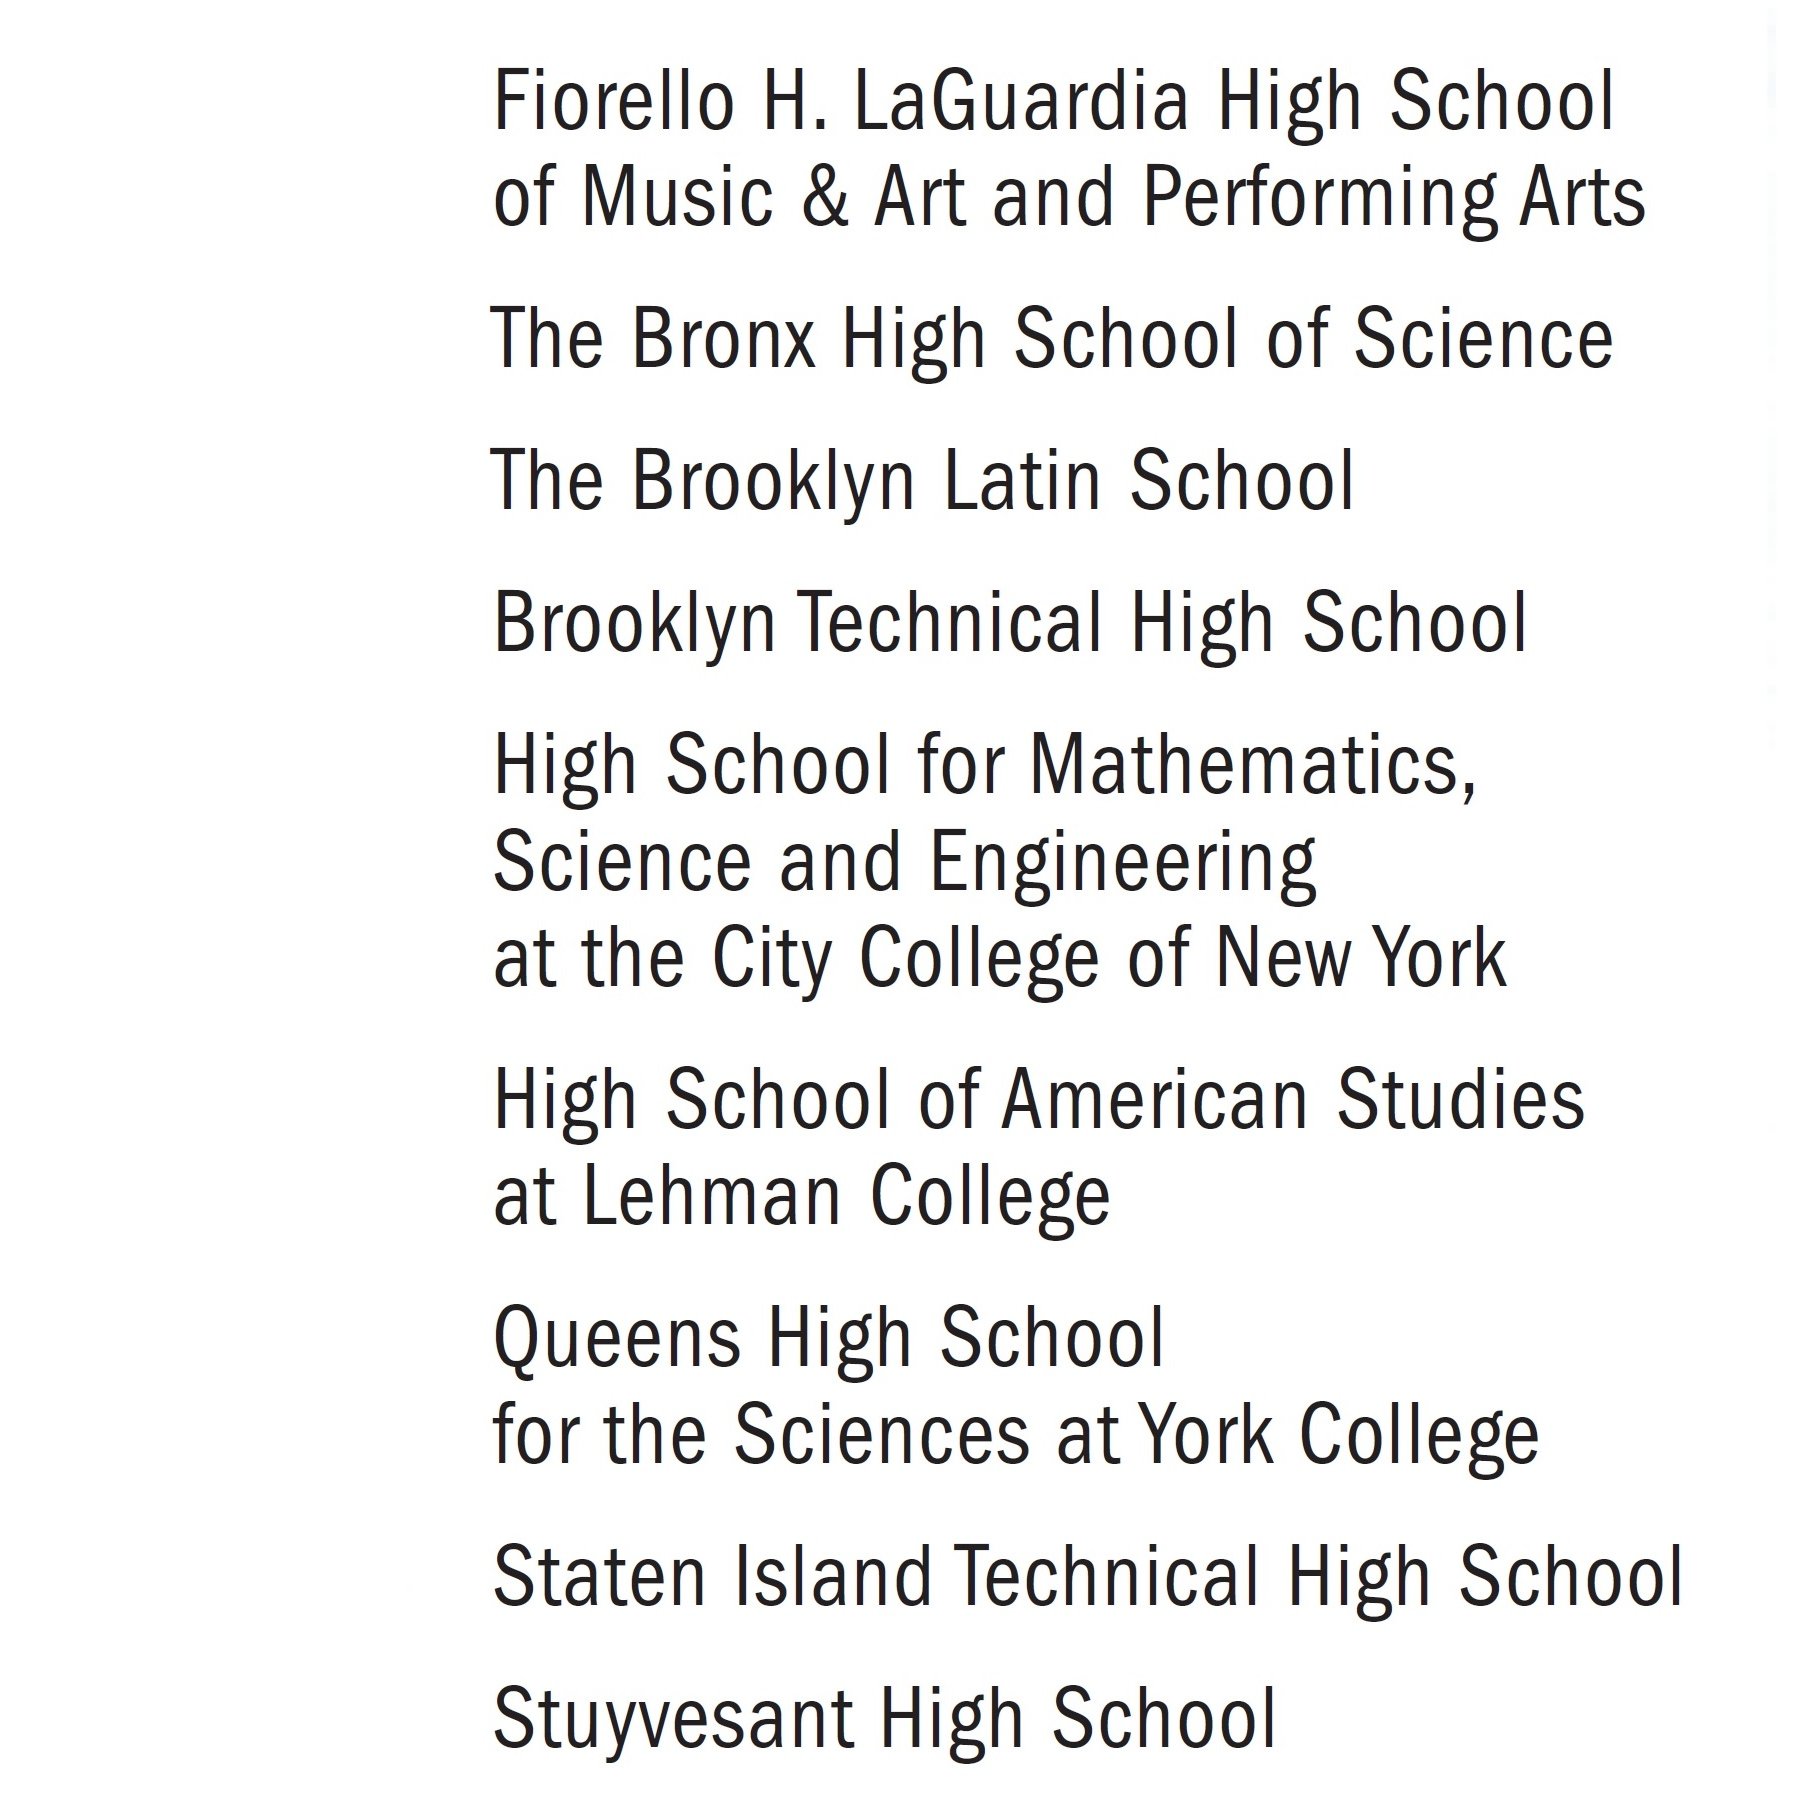 Alumni of @nycschools's specialized public high schools  纽约市特殊高中校友会 in favor of reforming #shsat in #nyc.  Other topics: #apa #affirmativeaction